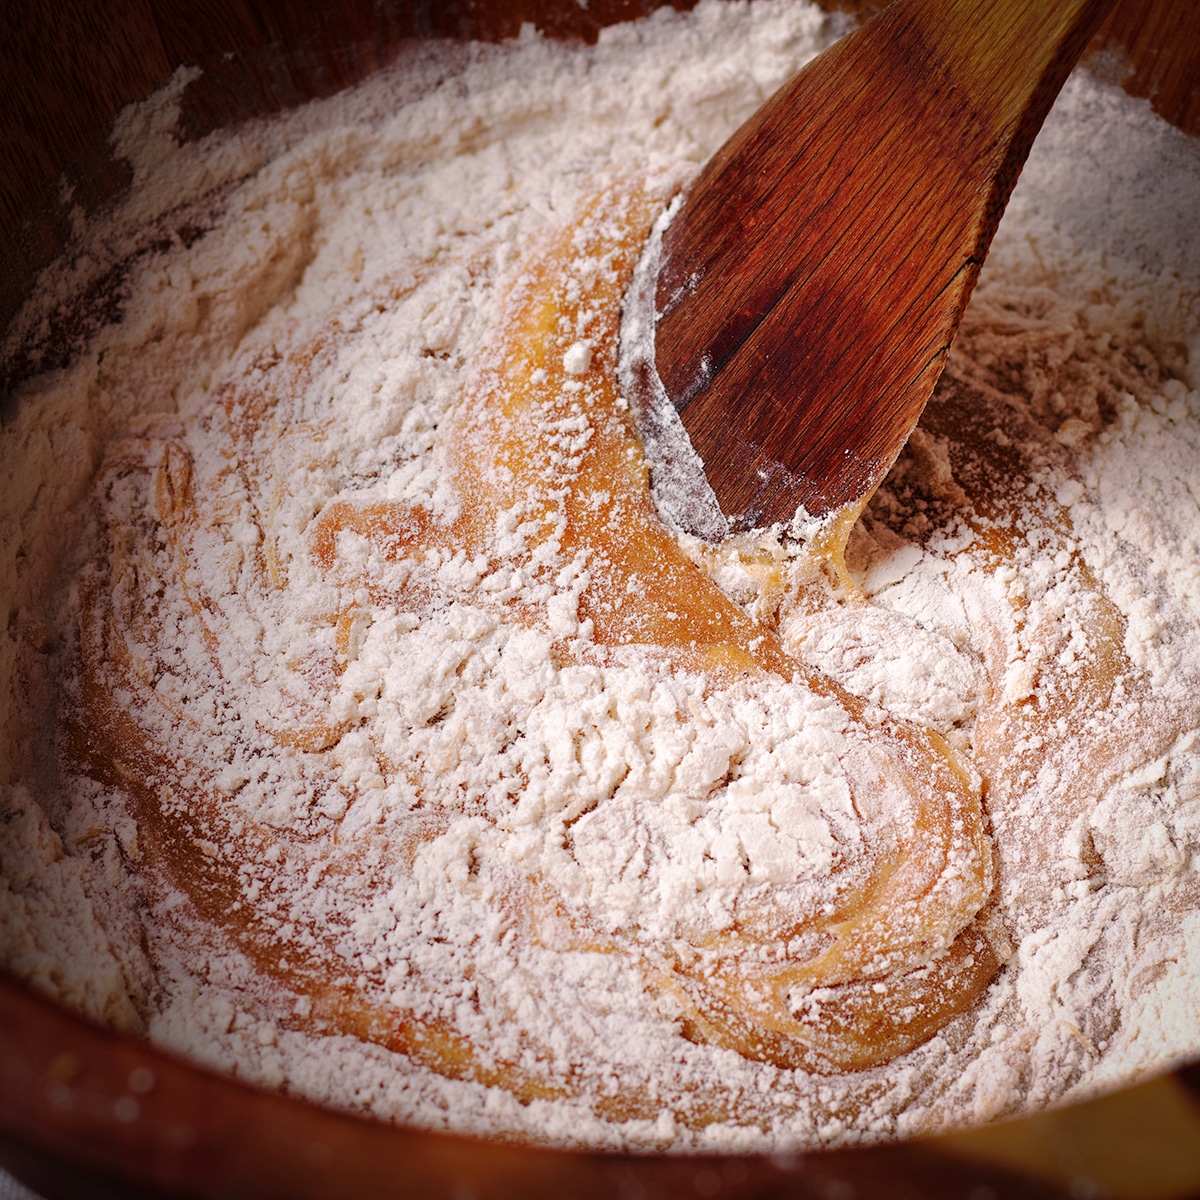 Using a wooden spoon to stir flour into the cake batter.